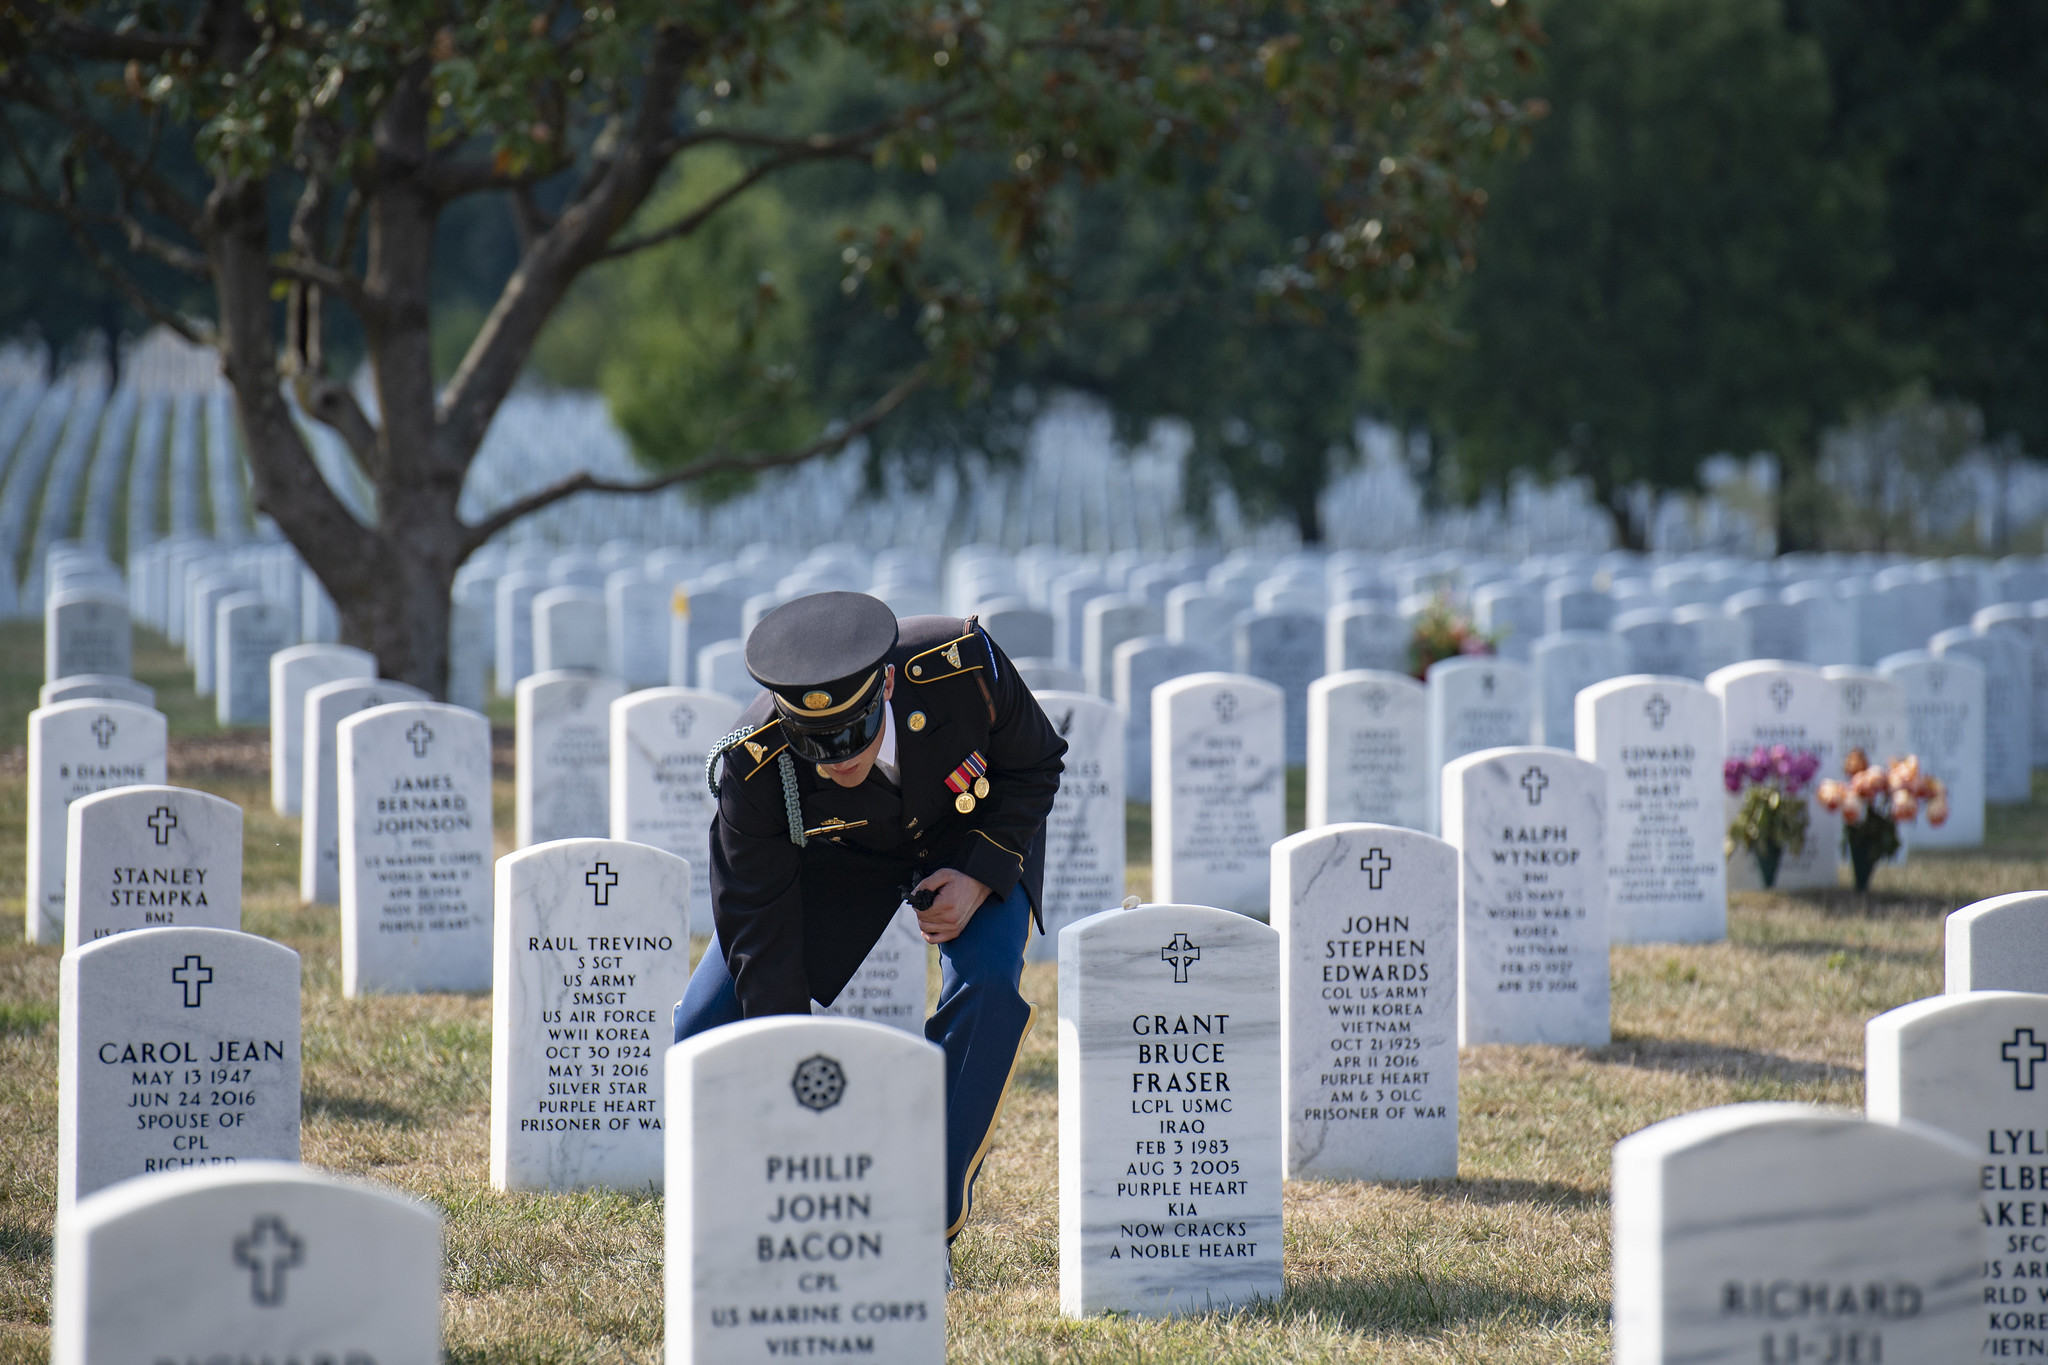 A uniformed soldier kneels before a gravestone at Arlington National Cemetery